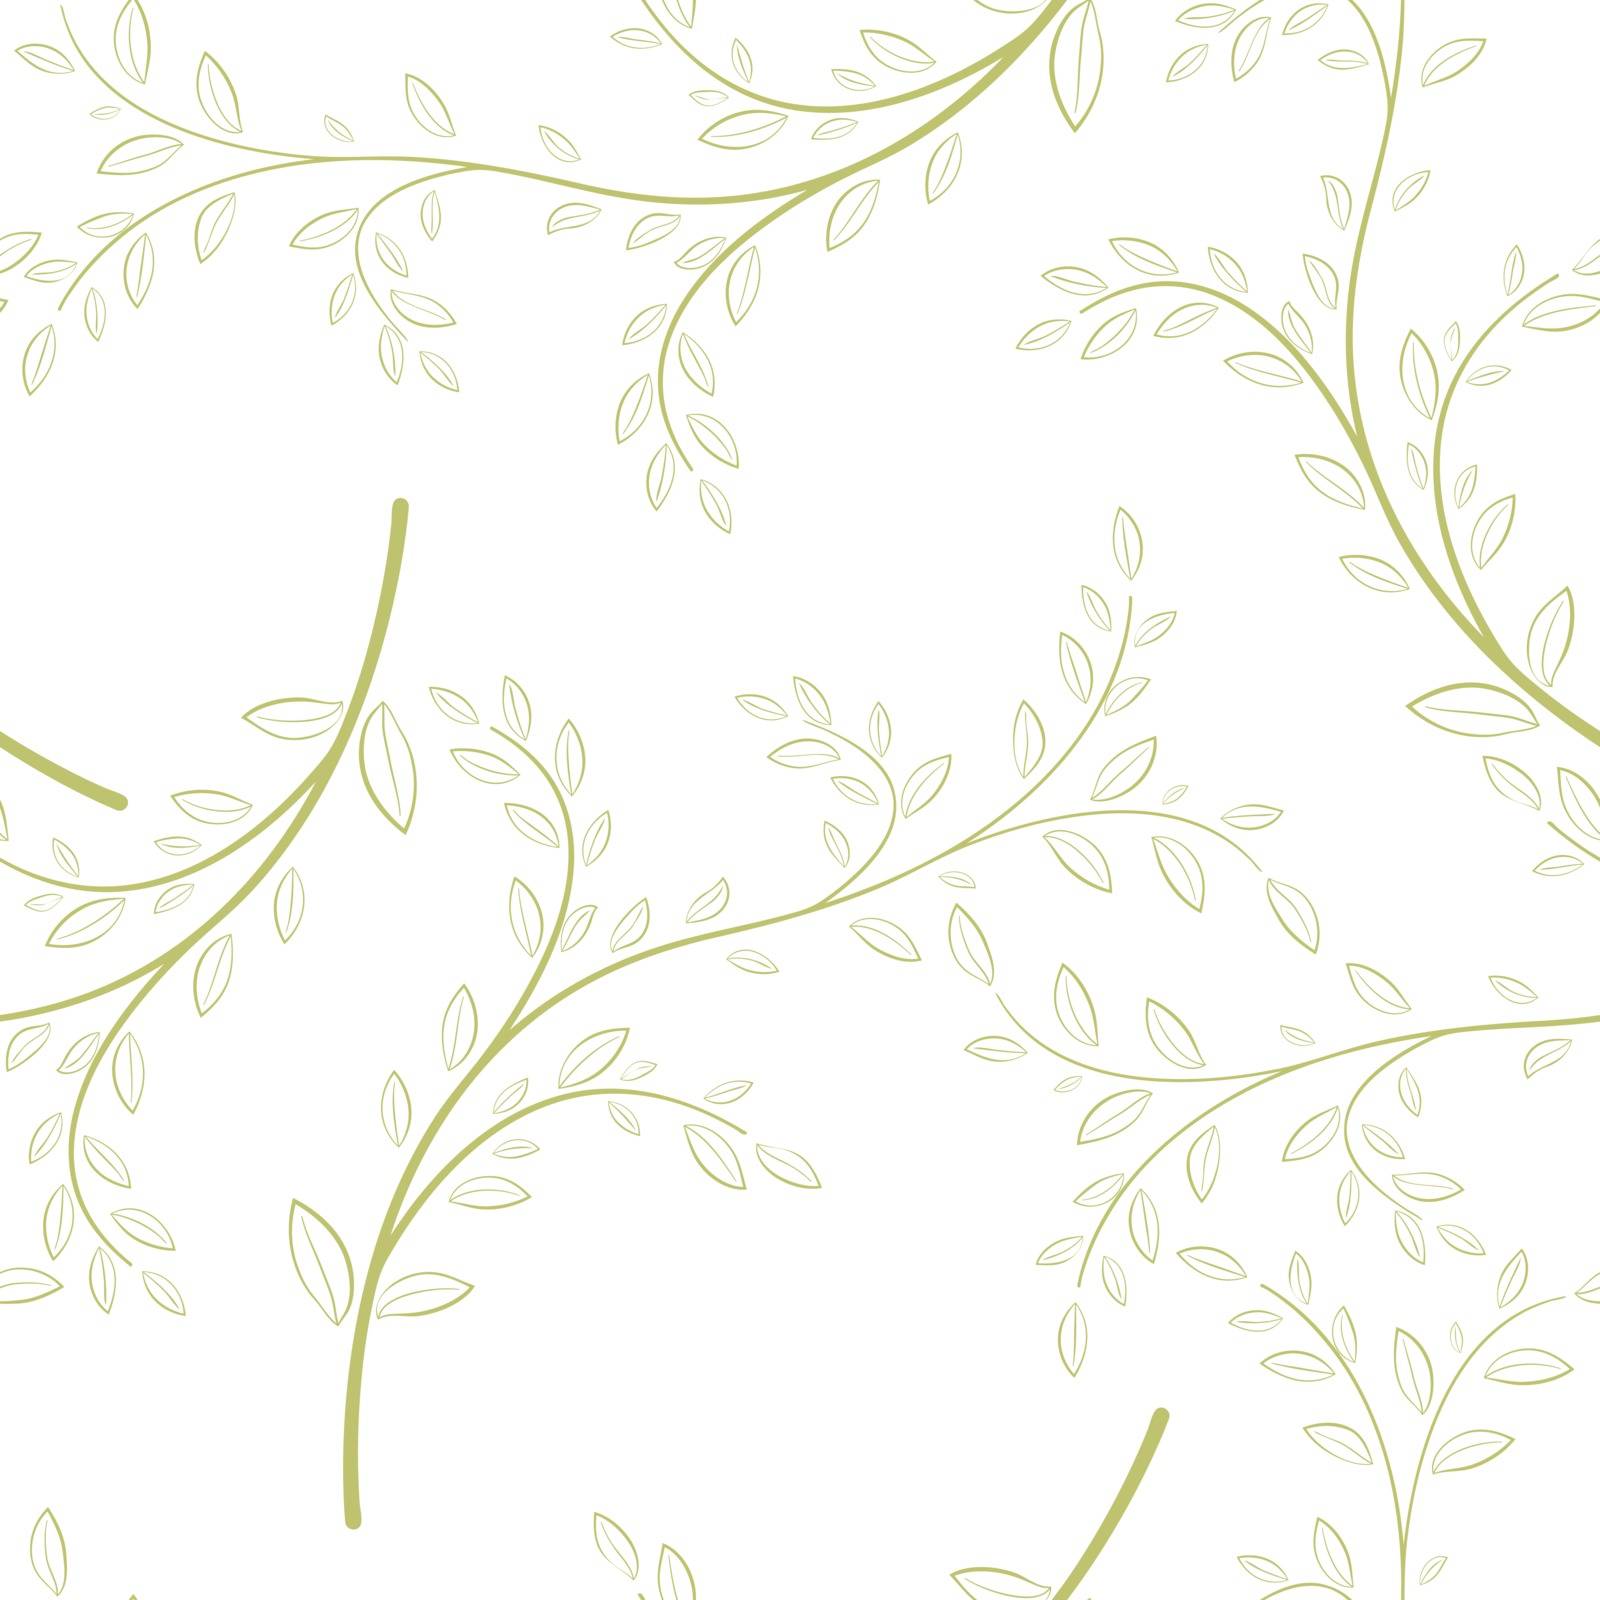 Seamless leaves background Easily editable vector image